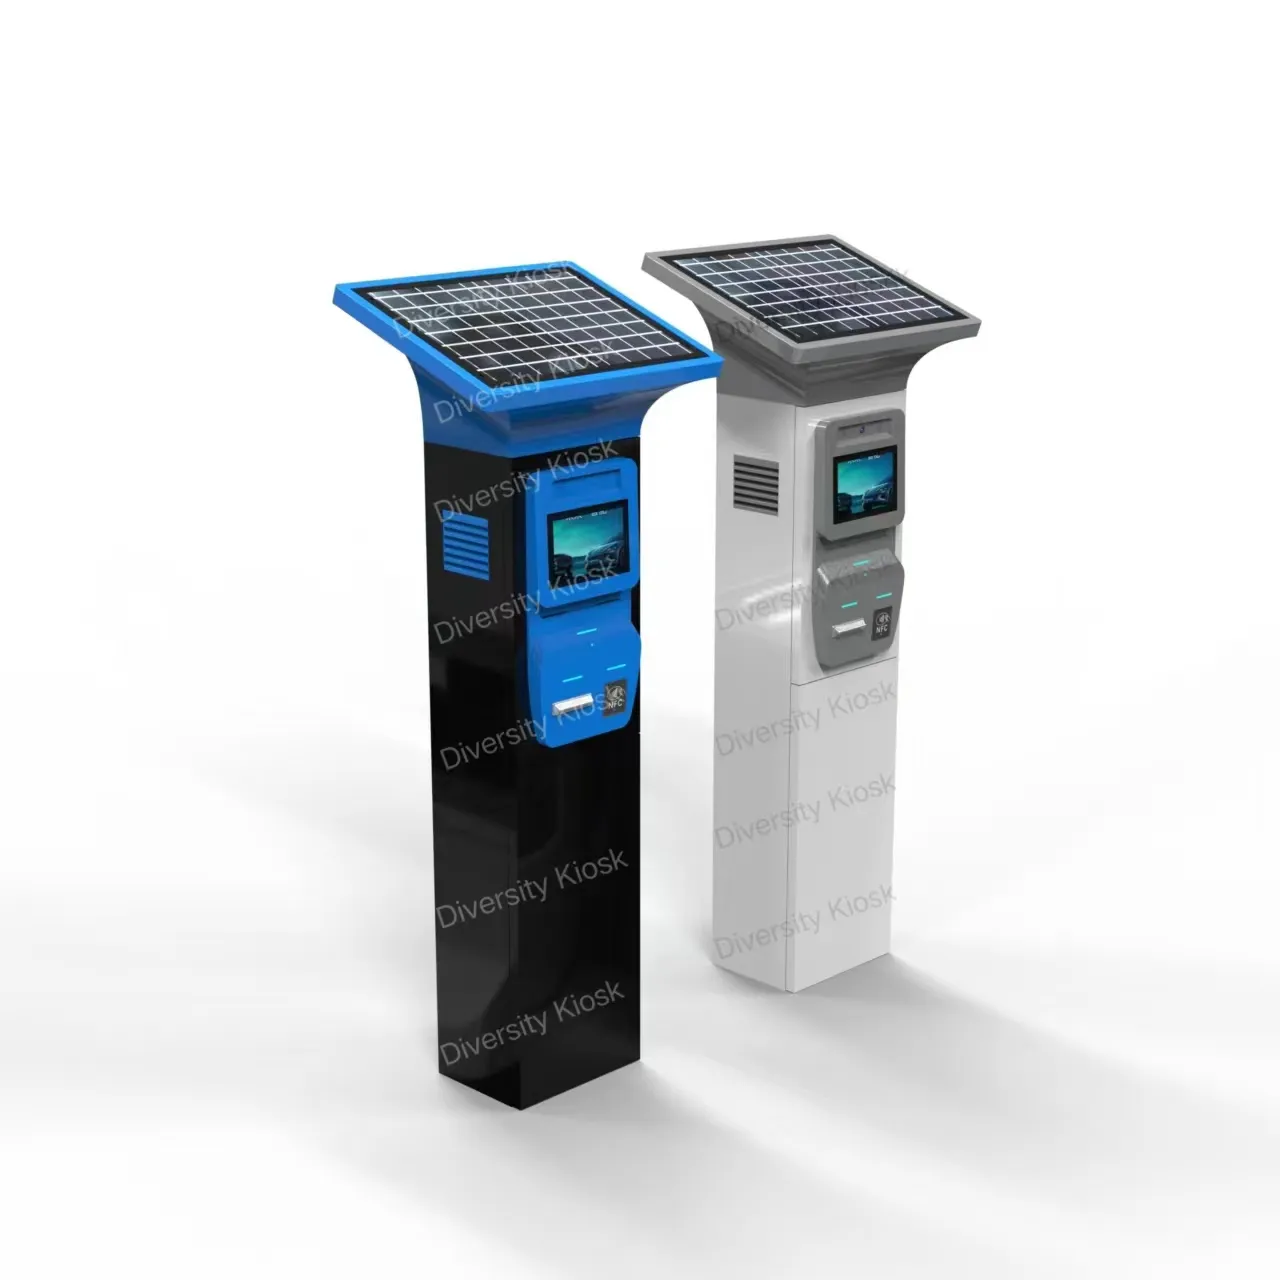 IP65 Waterproof Anti-theft Cash Payment Notes Coins Give Accept Automatically Shock Vibration Resistence Self Service Kiosk